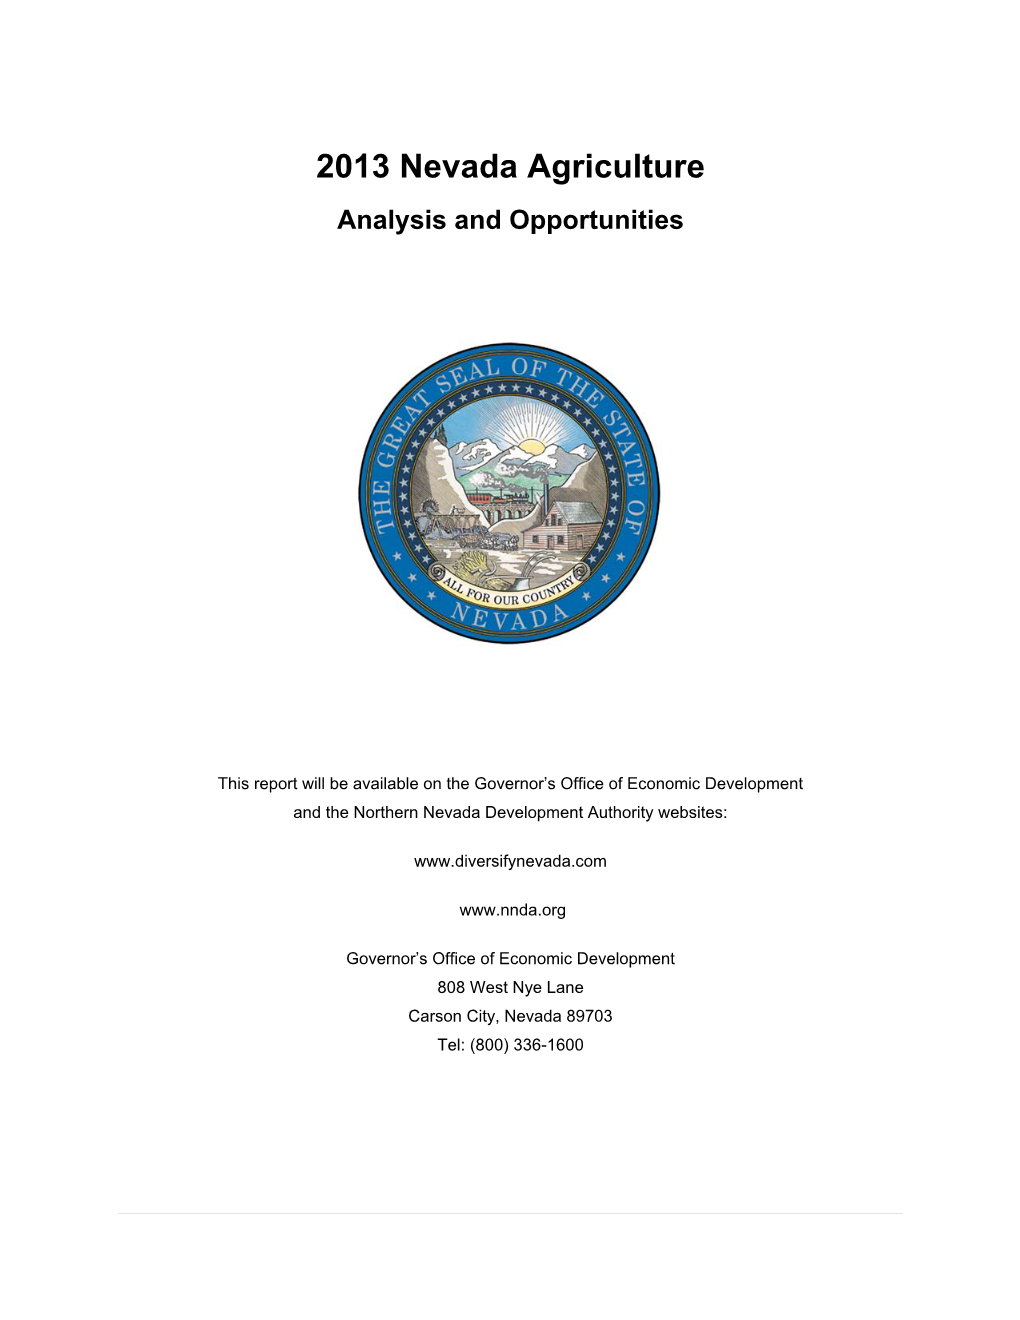 2013 Nevada Agriculture Analysis and Opportunities